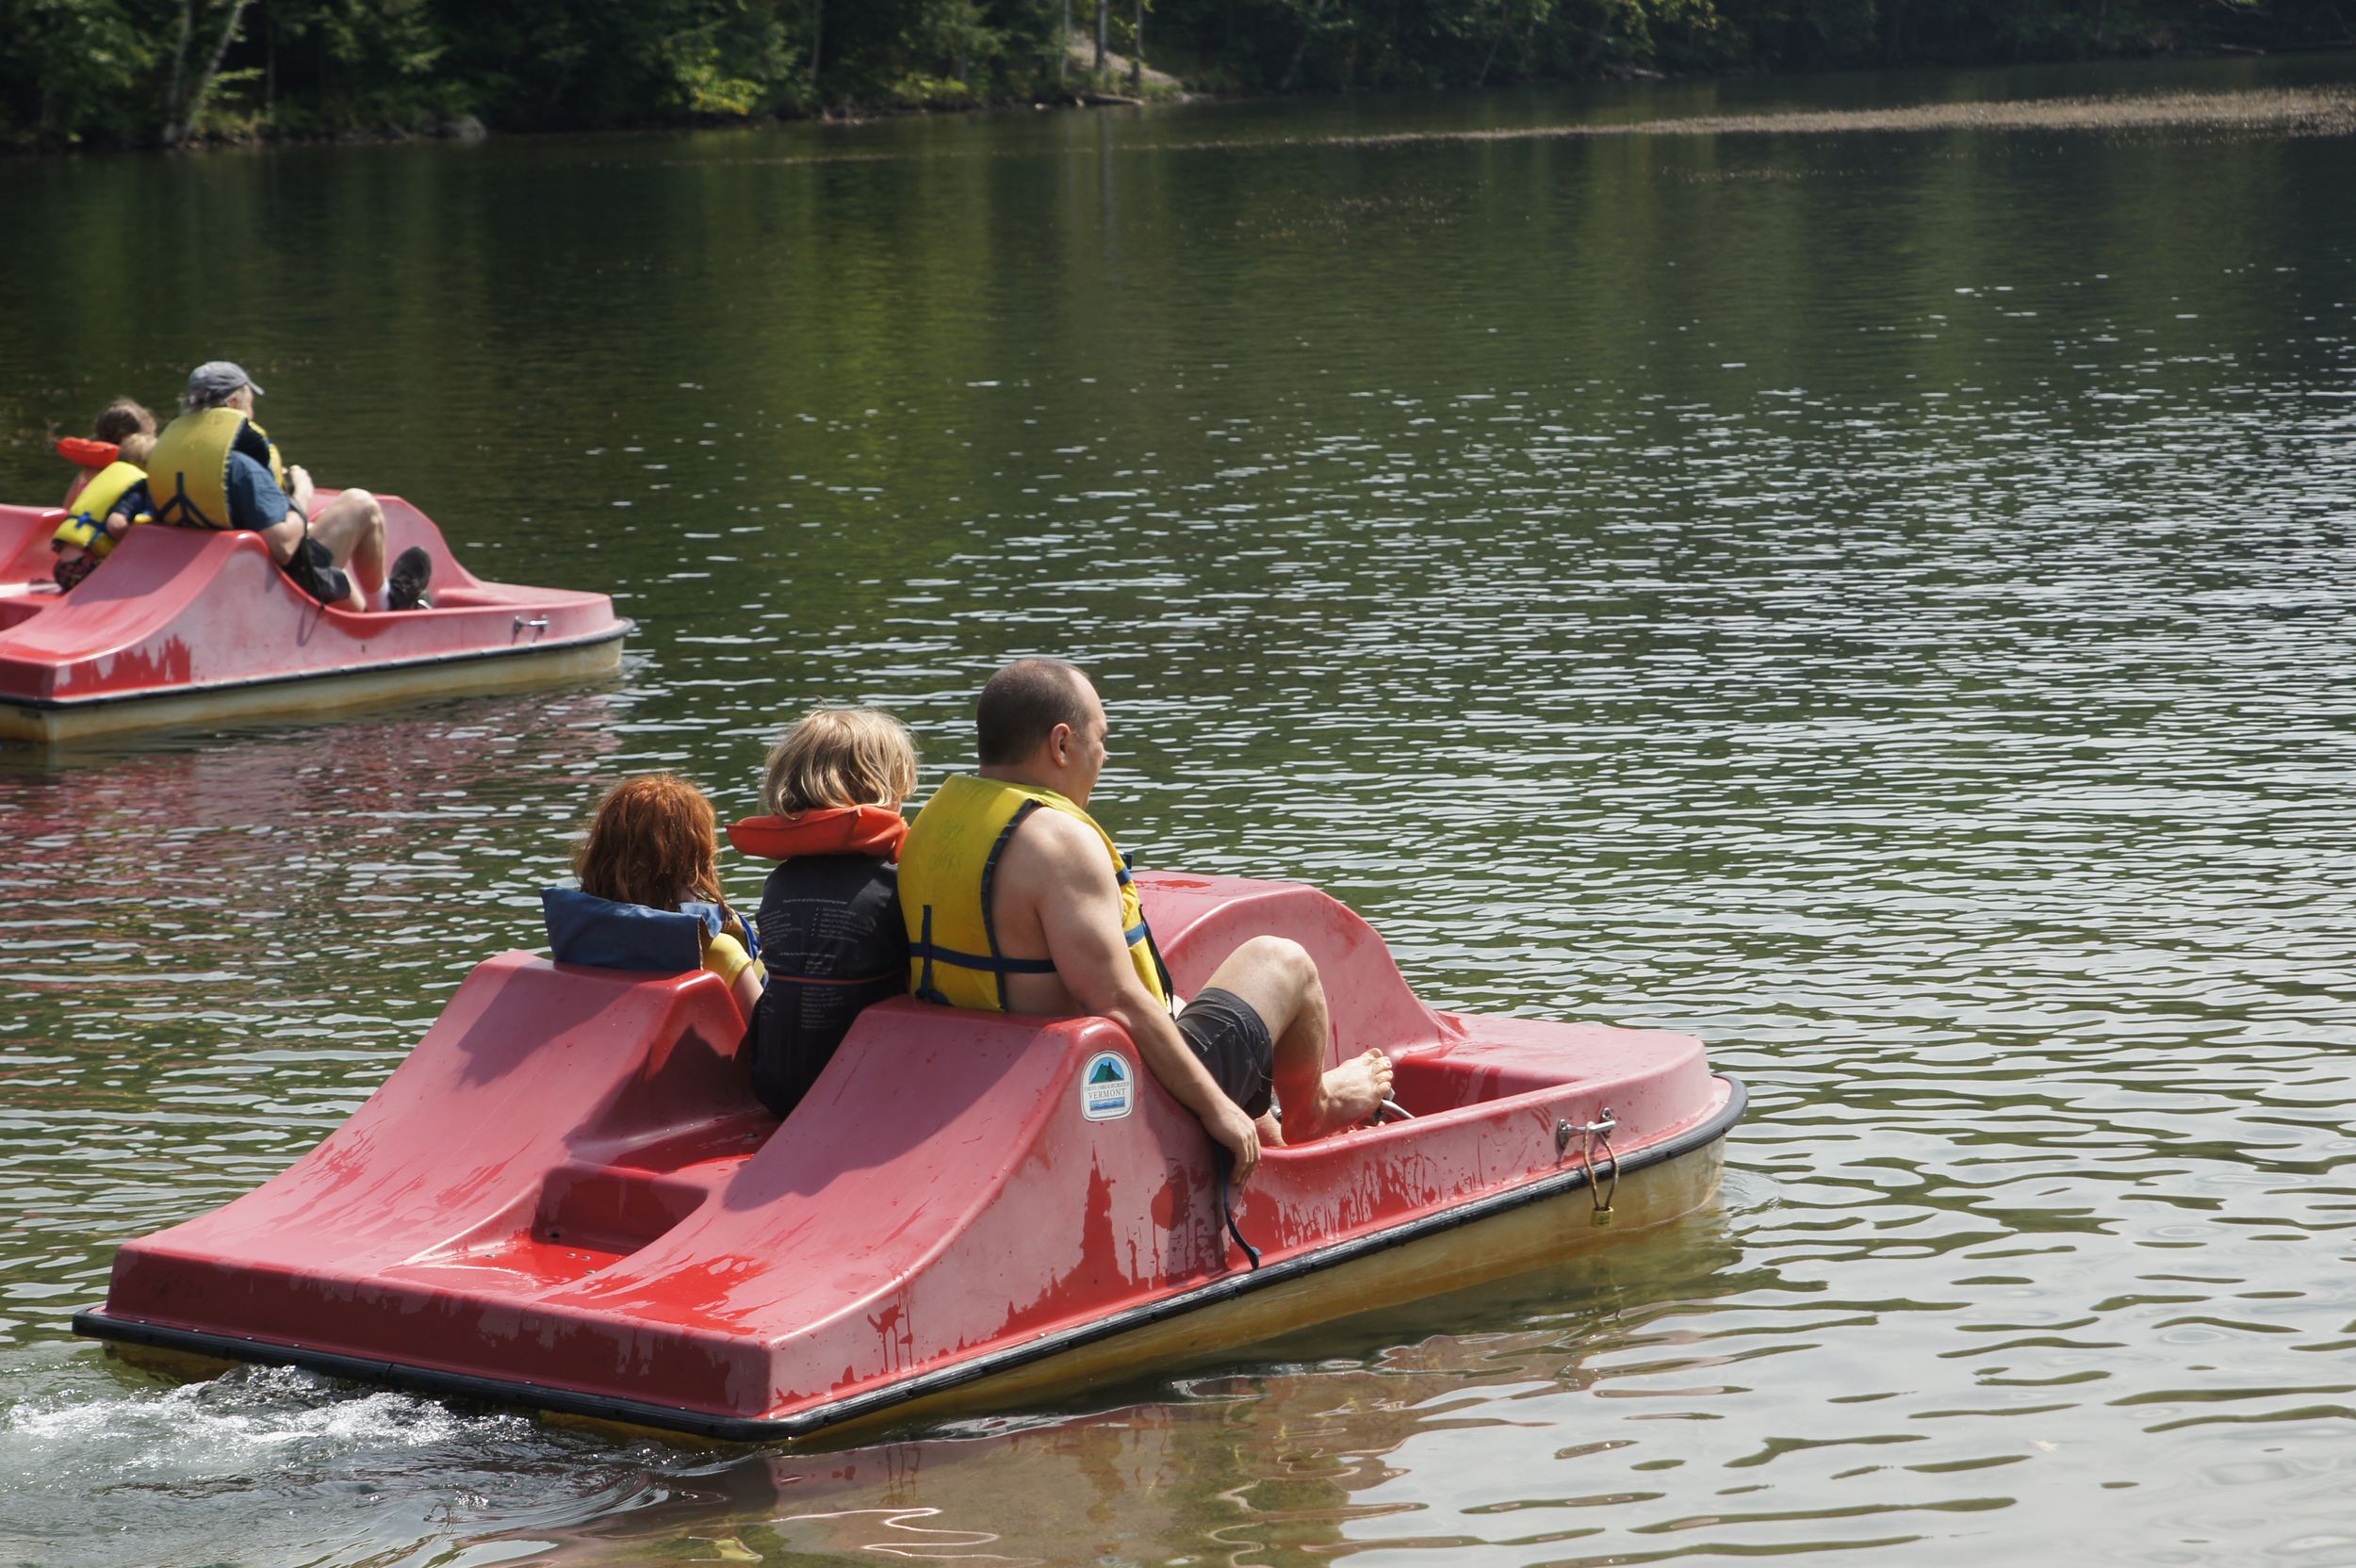 Paddle boats are fun...for the children who get to just ride.